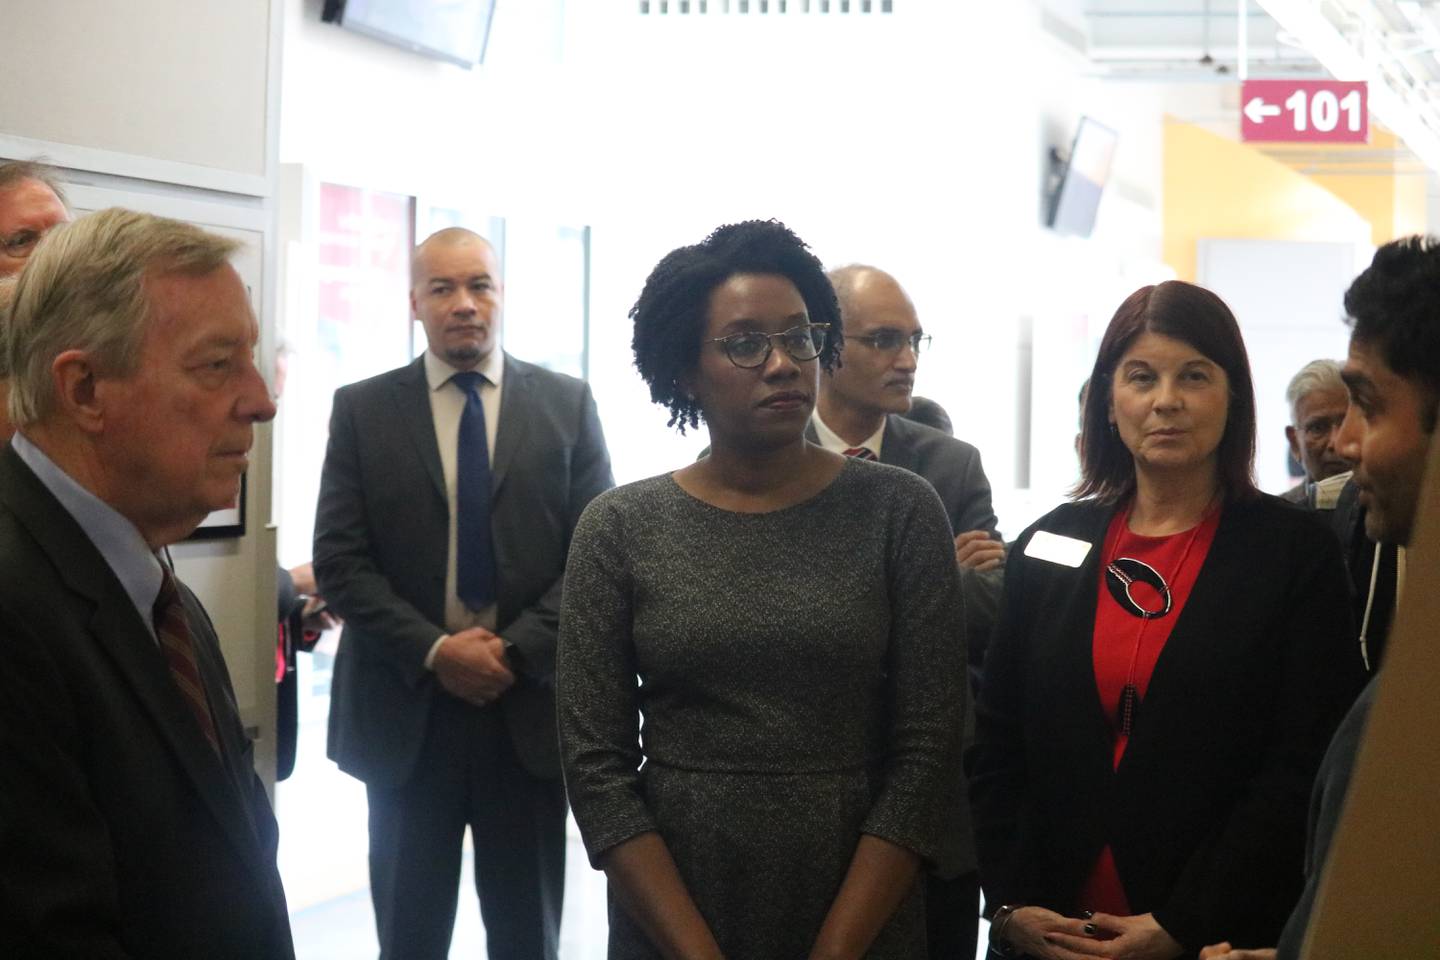 U.S. Sen. Dick Durbin (left), U.S. Rep. Lauren Underwood (center) and NIU president Lisa Freeman (right) take a tour of NIU's College of Engineering and Engineering Technology, shown here April 5, 2023.